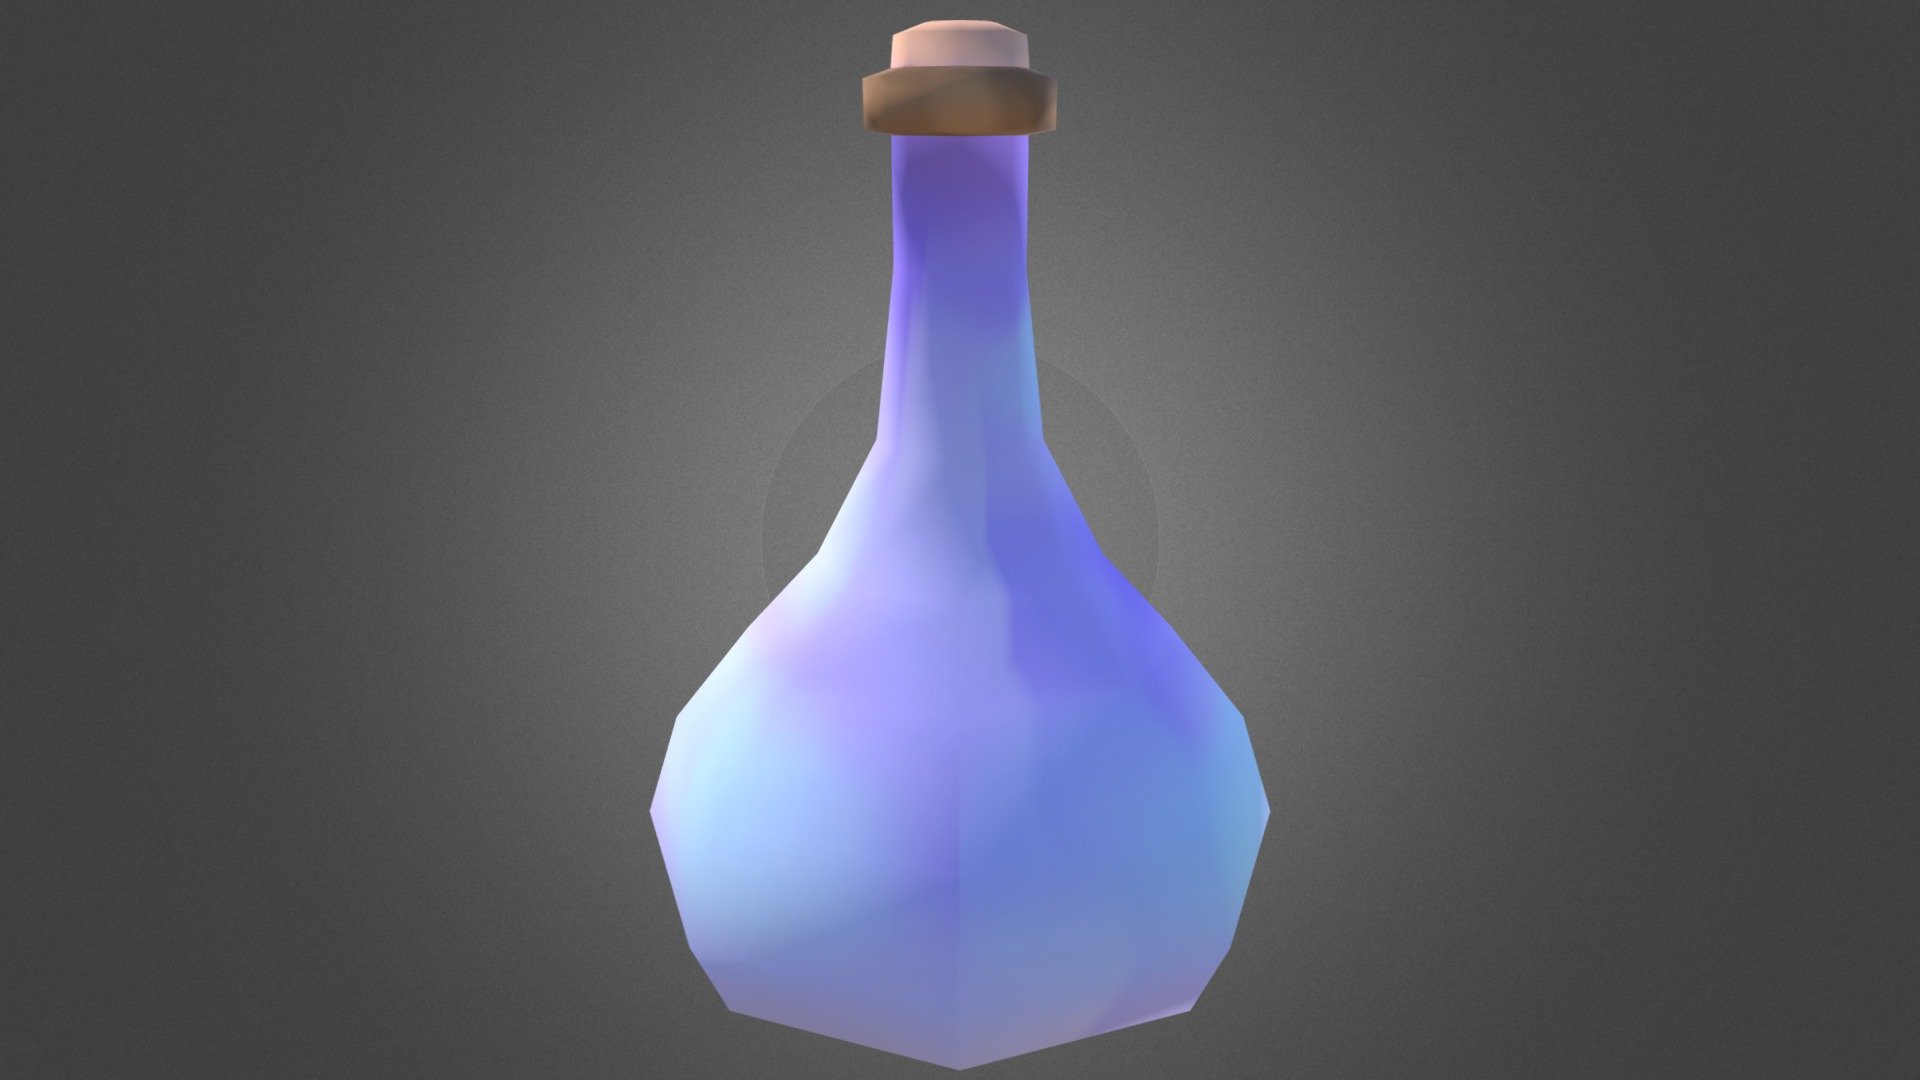 Blue Vase Modeled in blender.
Handpainted textures.
Anyone can download.
This is Part two of the Vase series 3d model